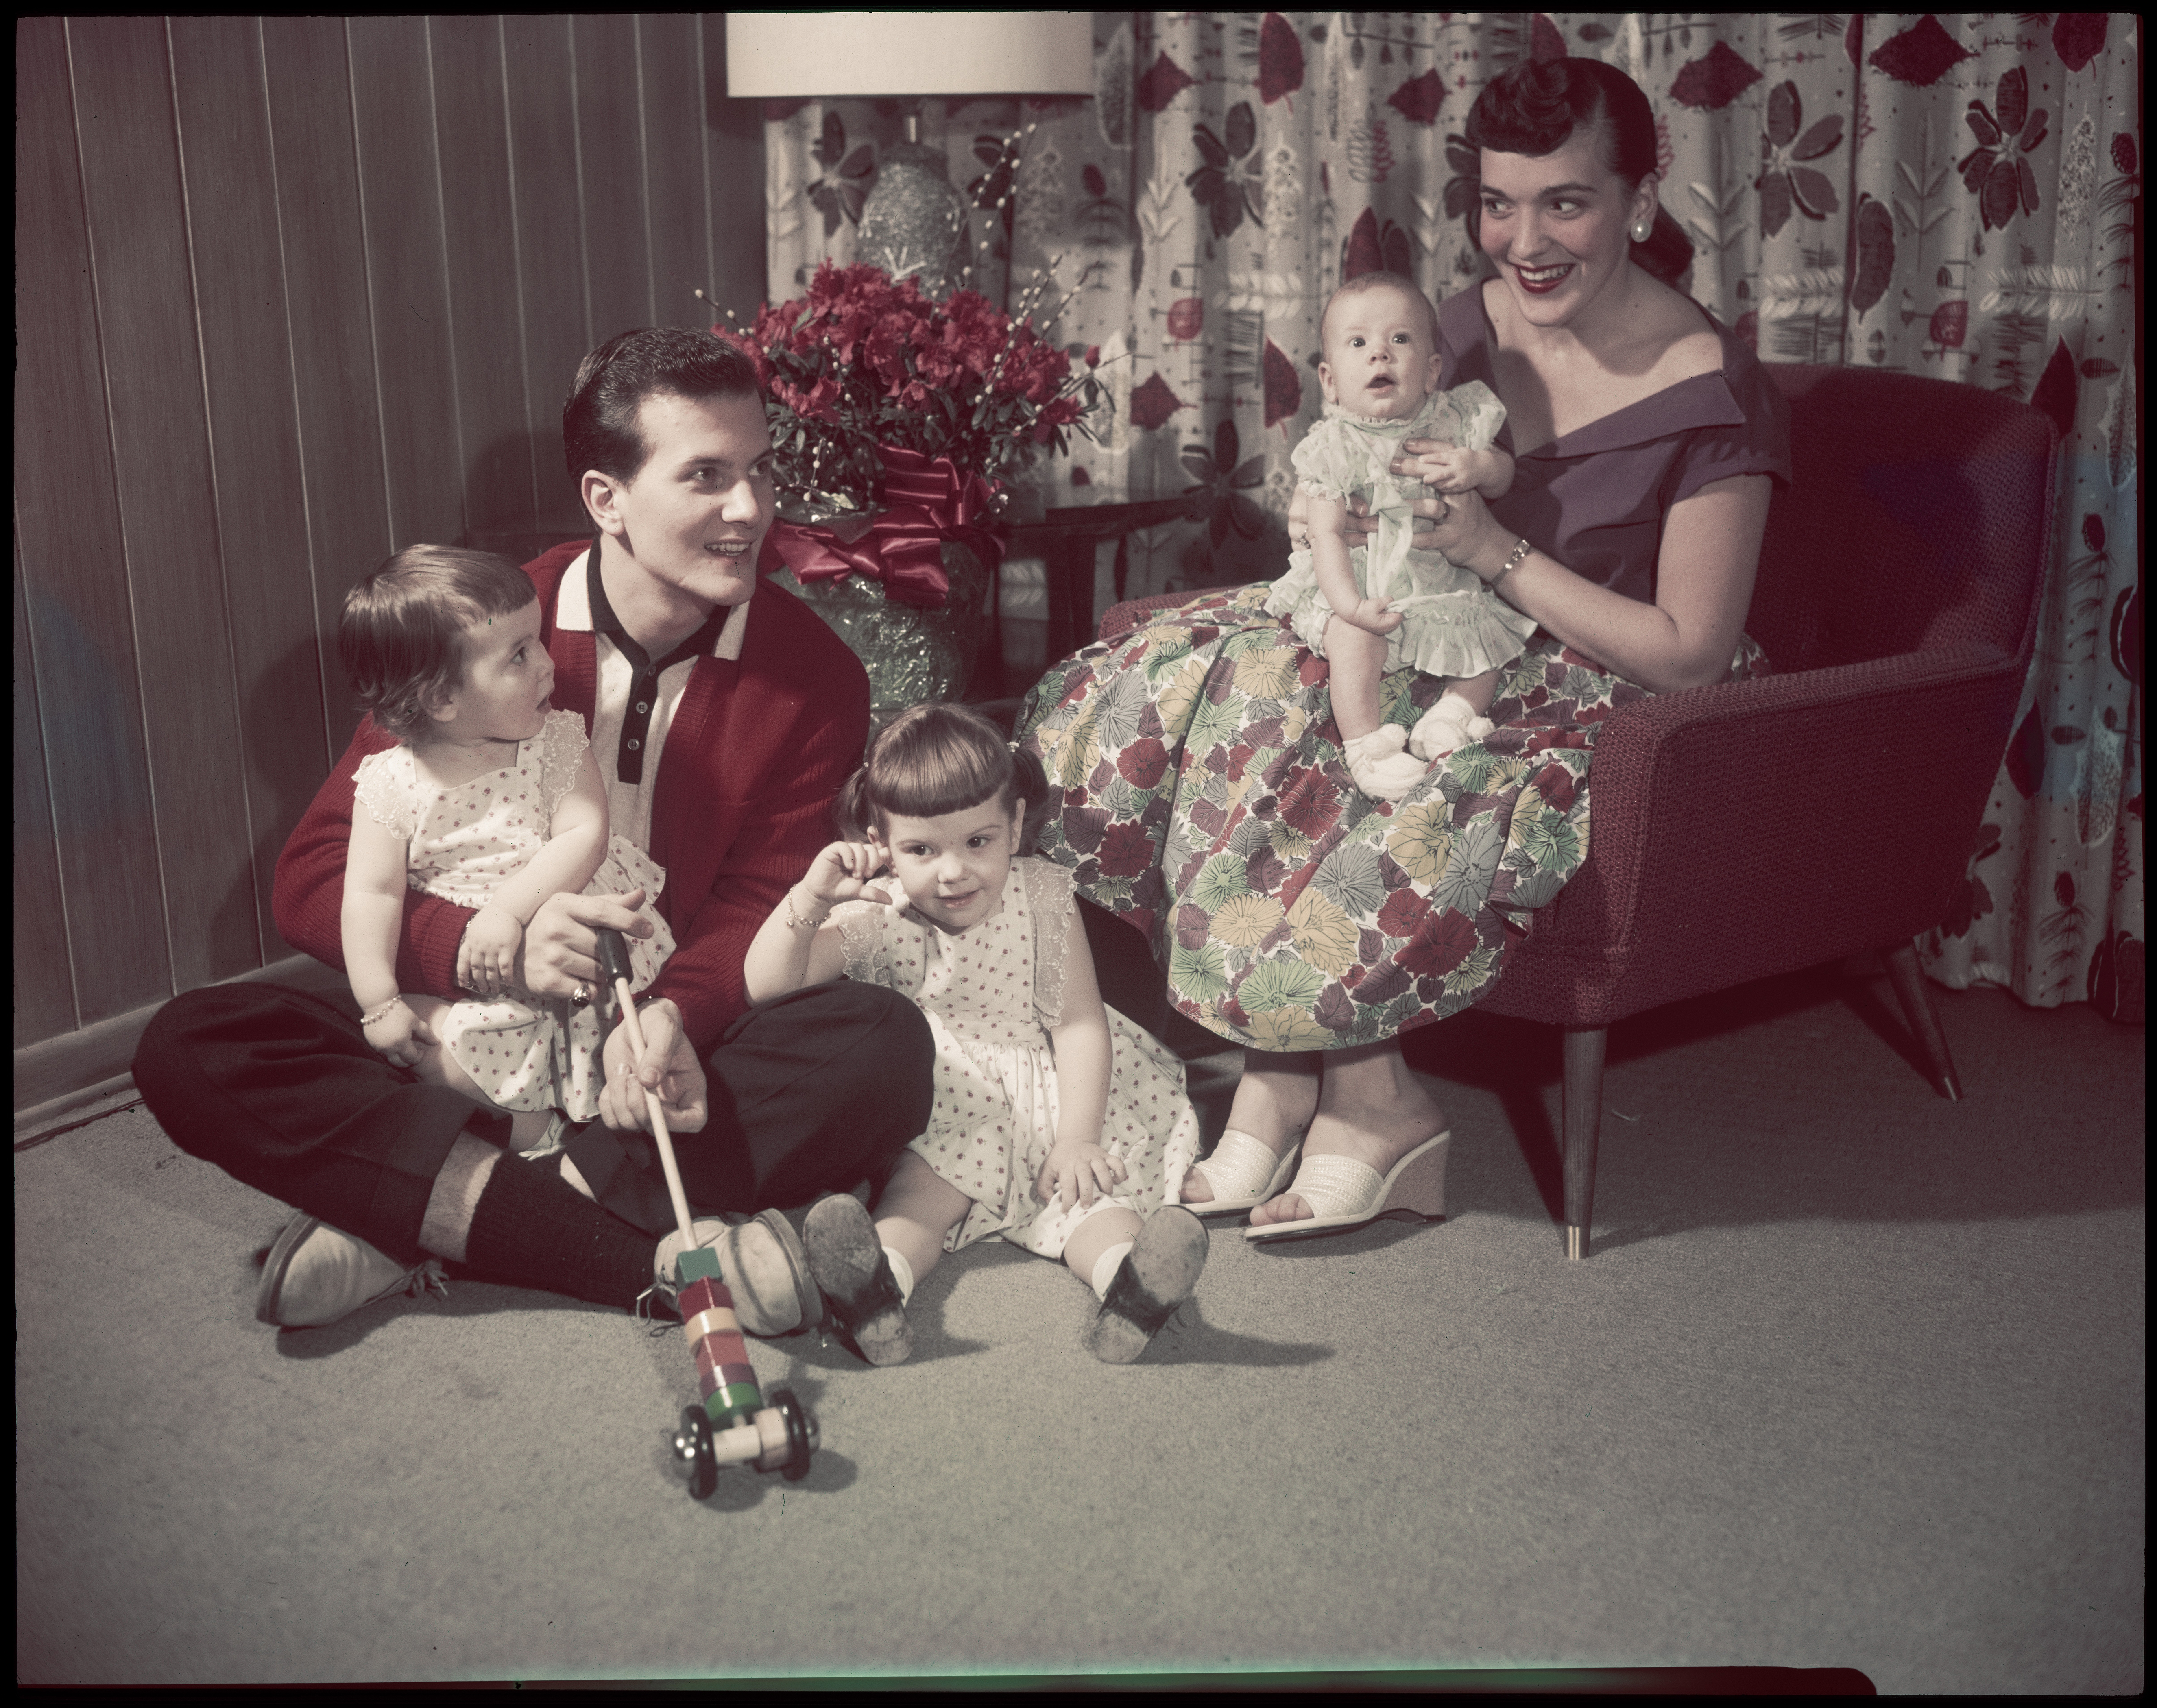 Pat Boone with his family photographed in 1957 | Source: Getty Images